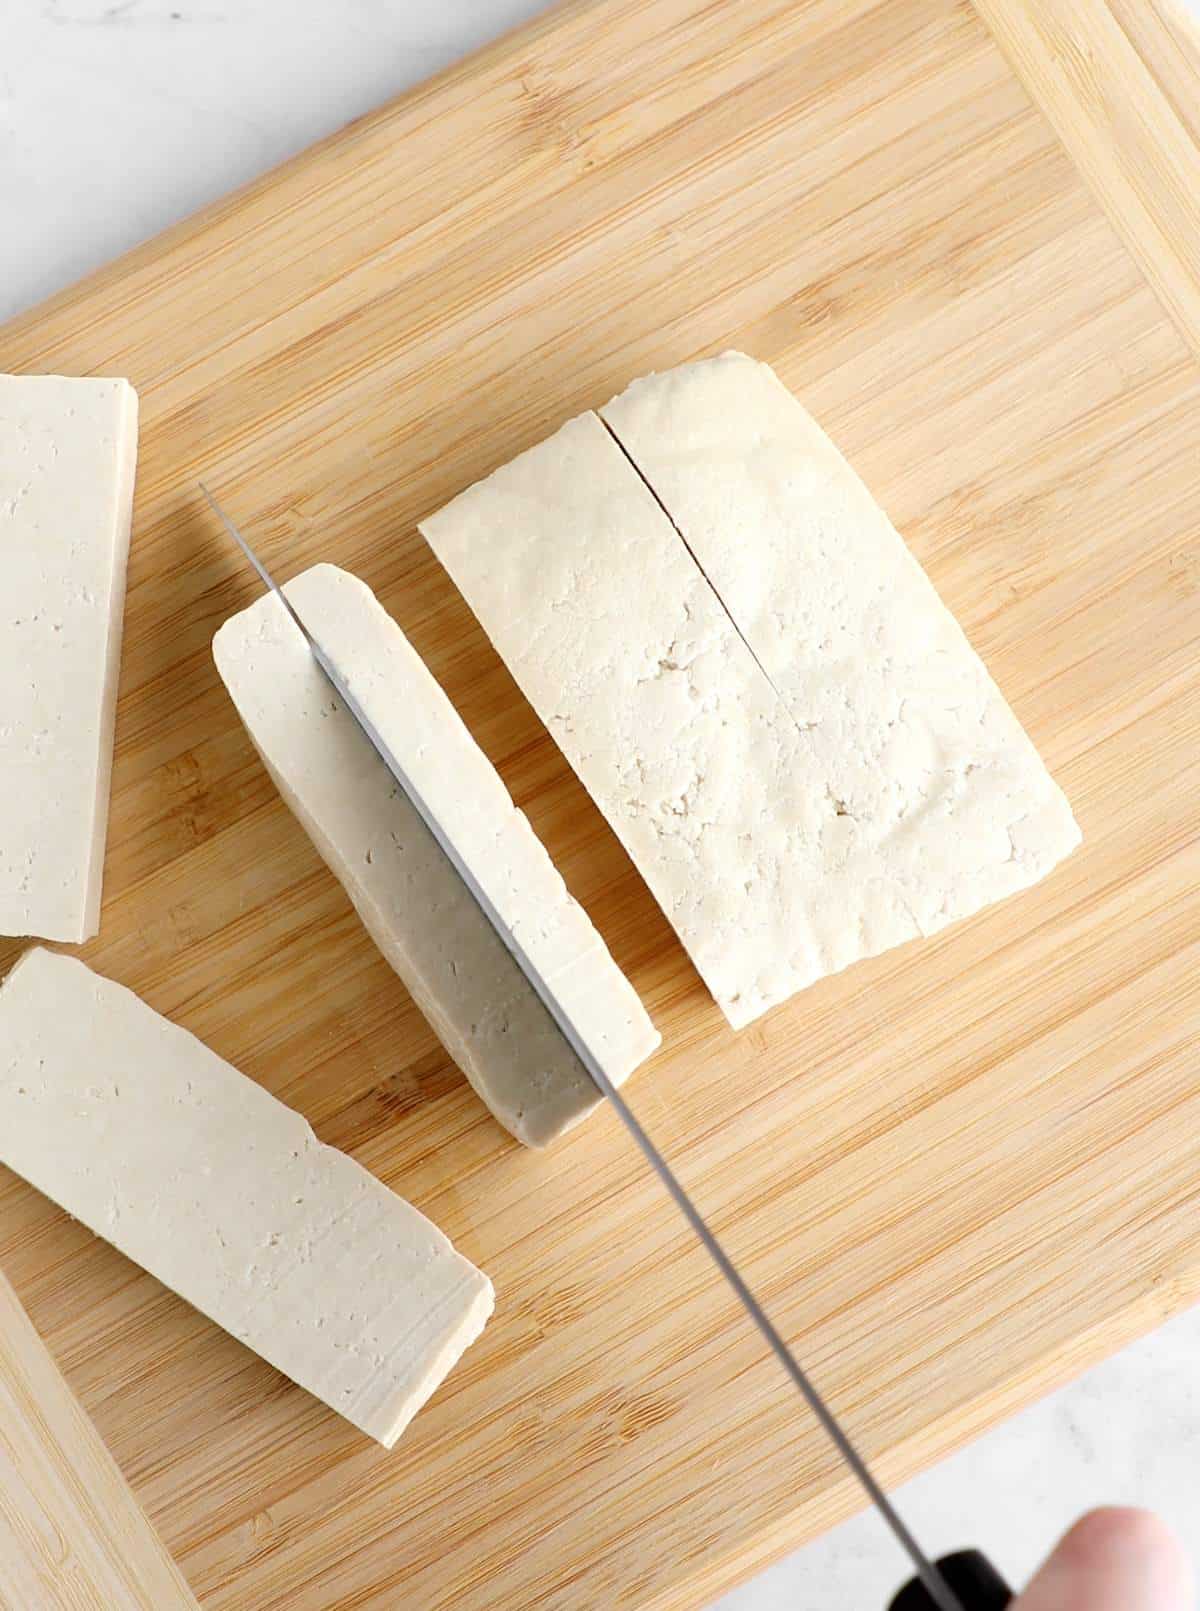 Tofu being sliced with a knife into strips.